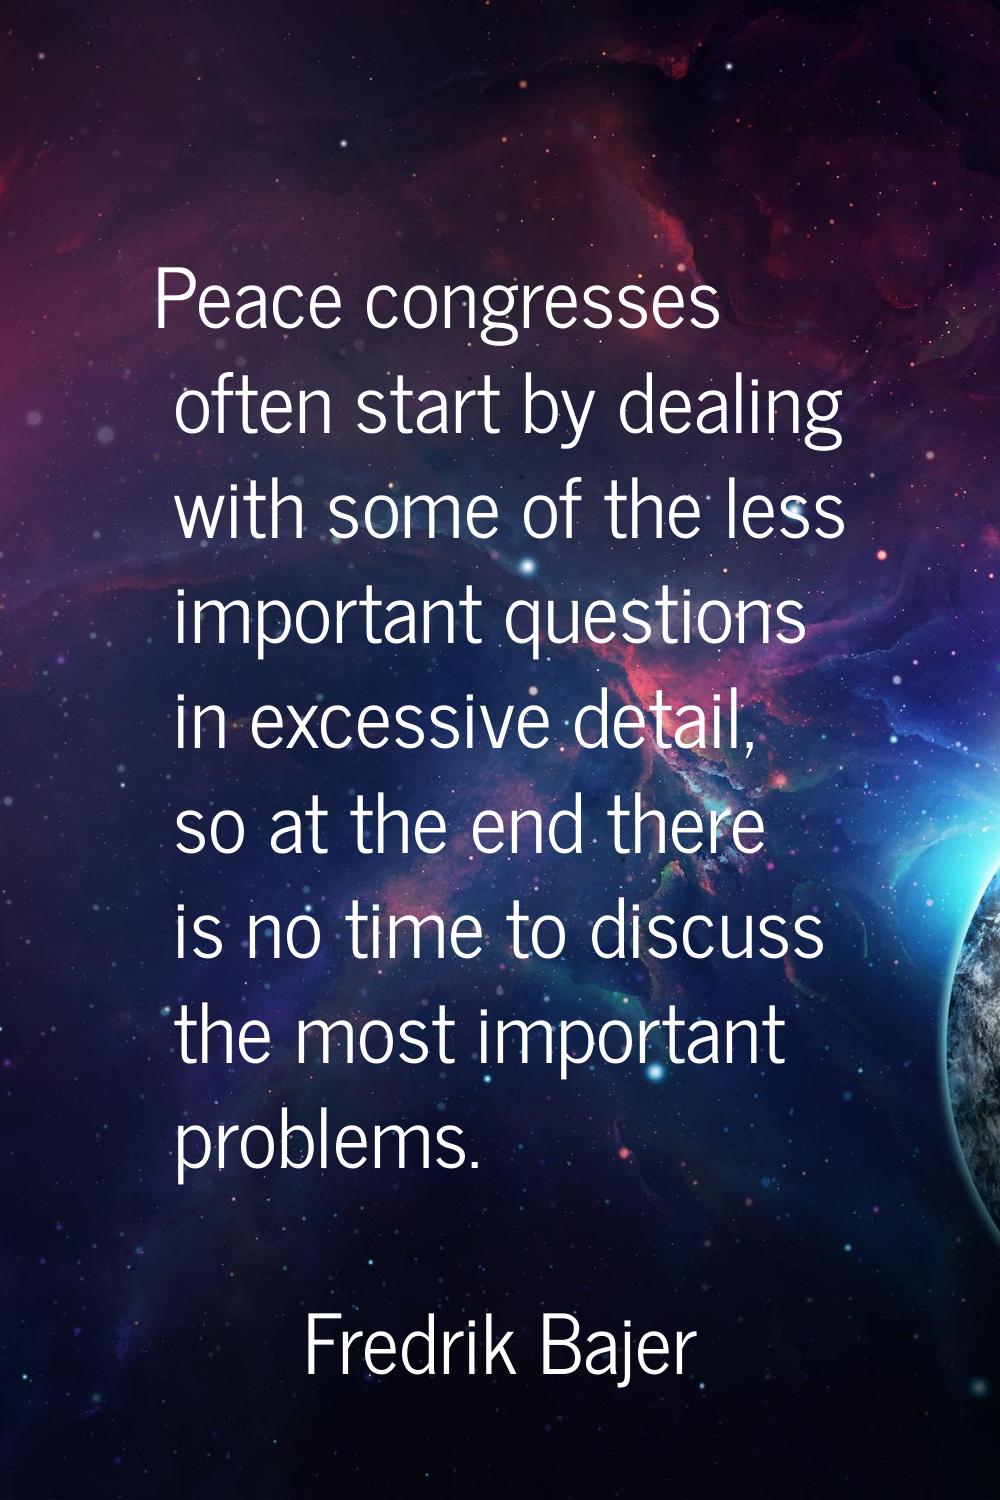 Peace congresses often start by dealing with some of the less important questions in excessive deta